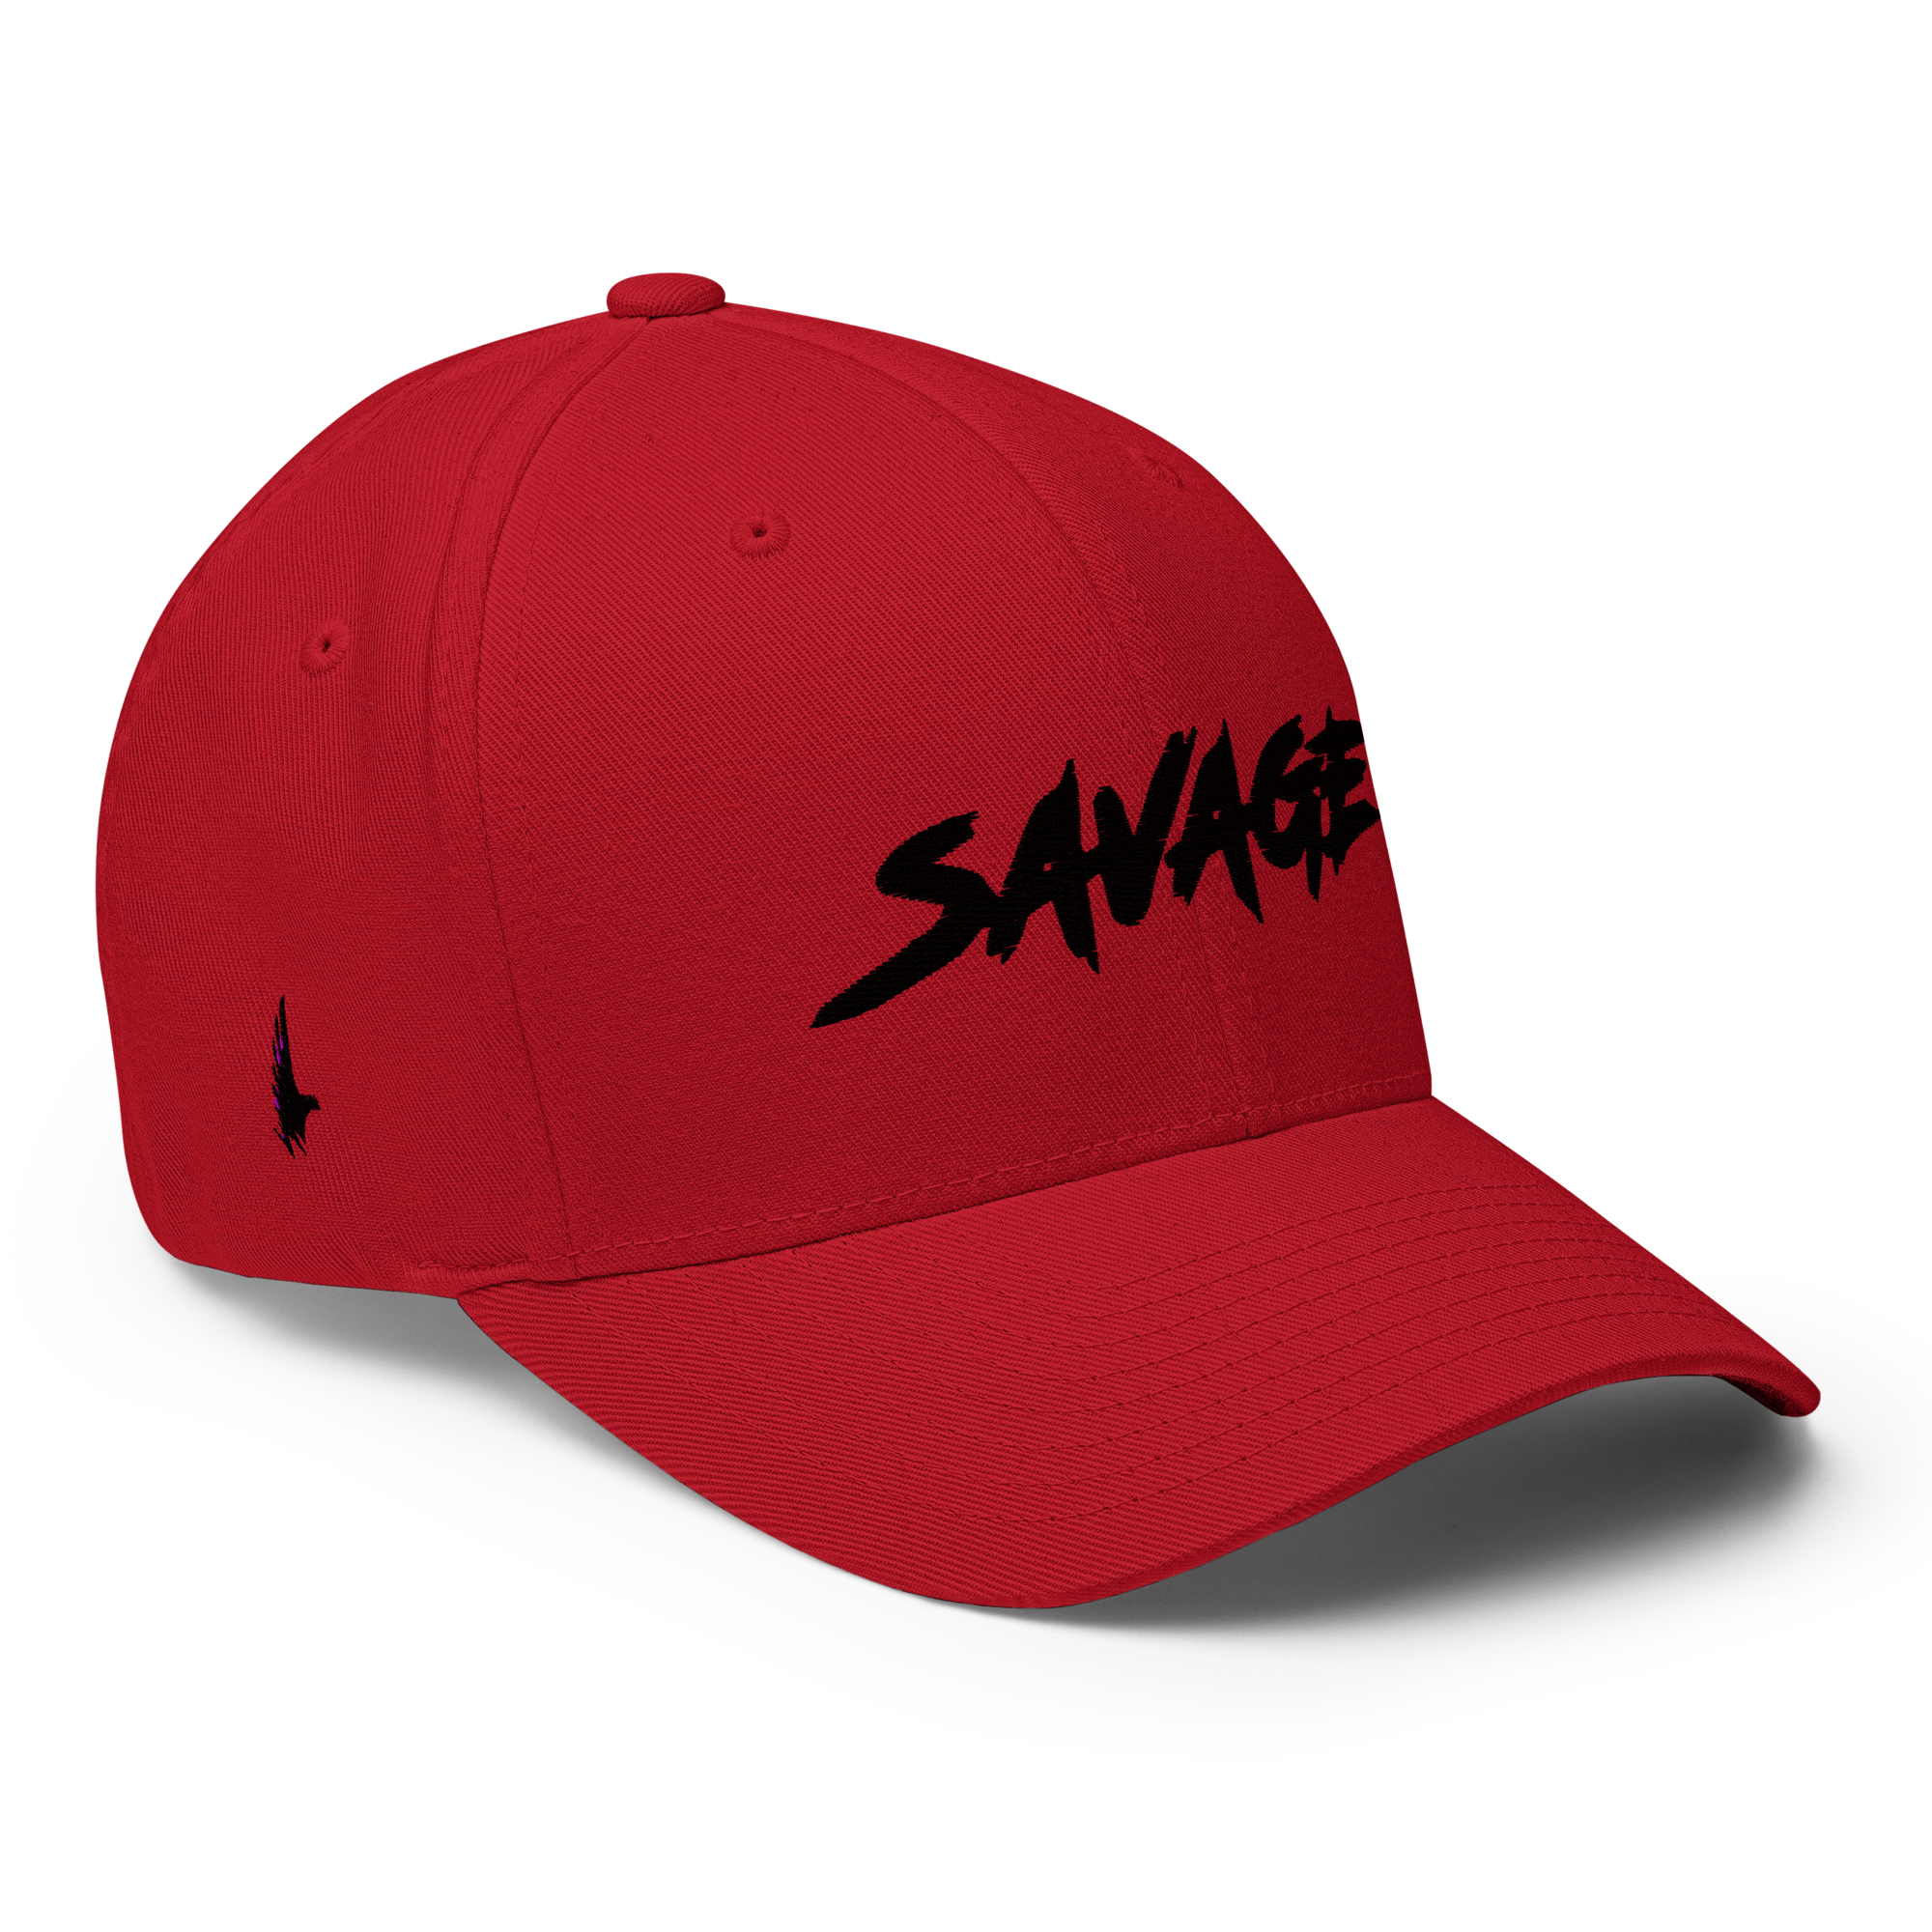 Savage Fitted Hat Red Black - Loyalty Vibes